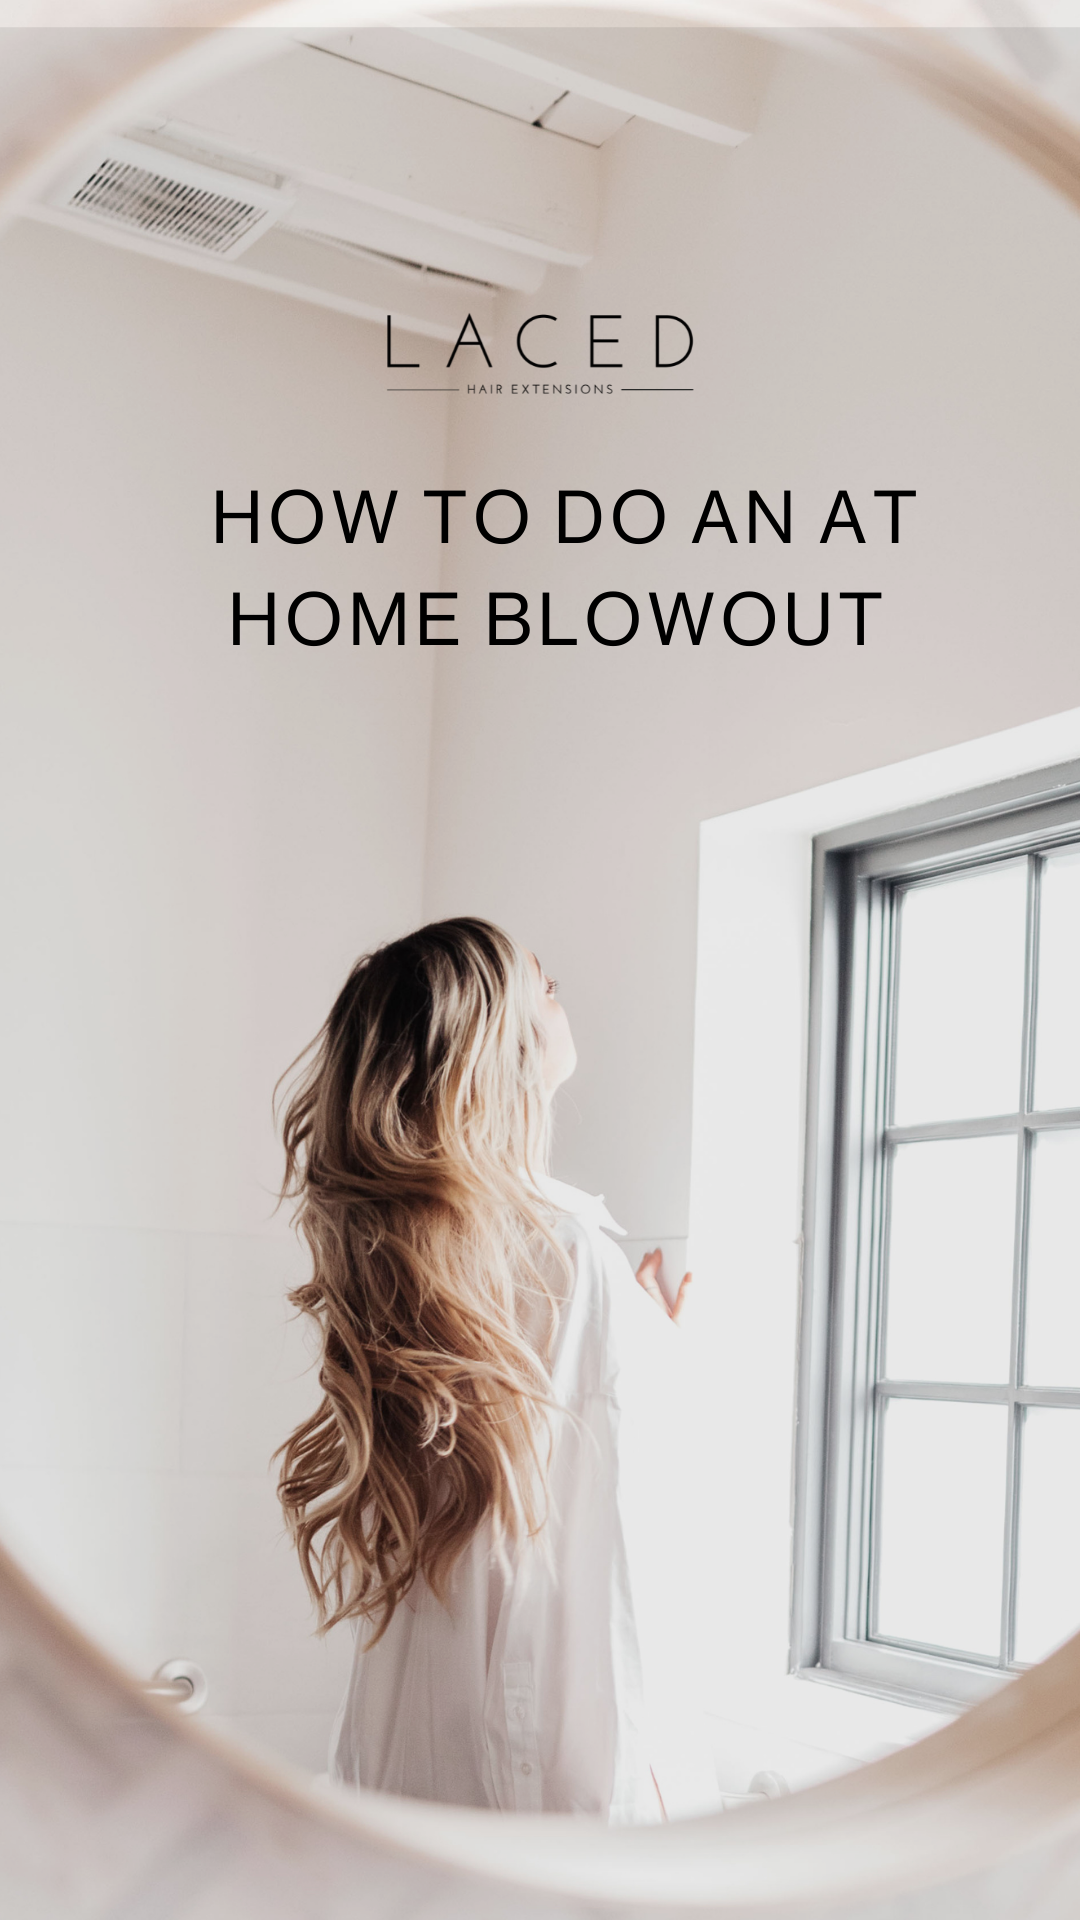 How To Do A Salon Blowout at Home